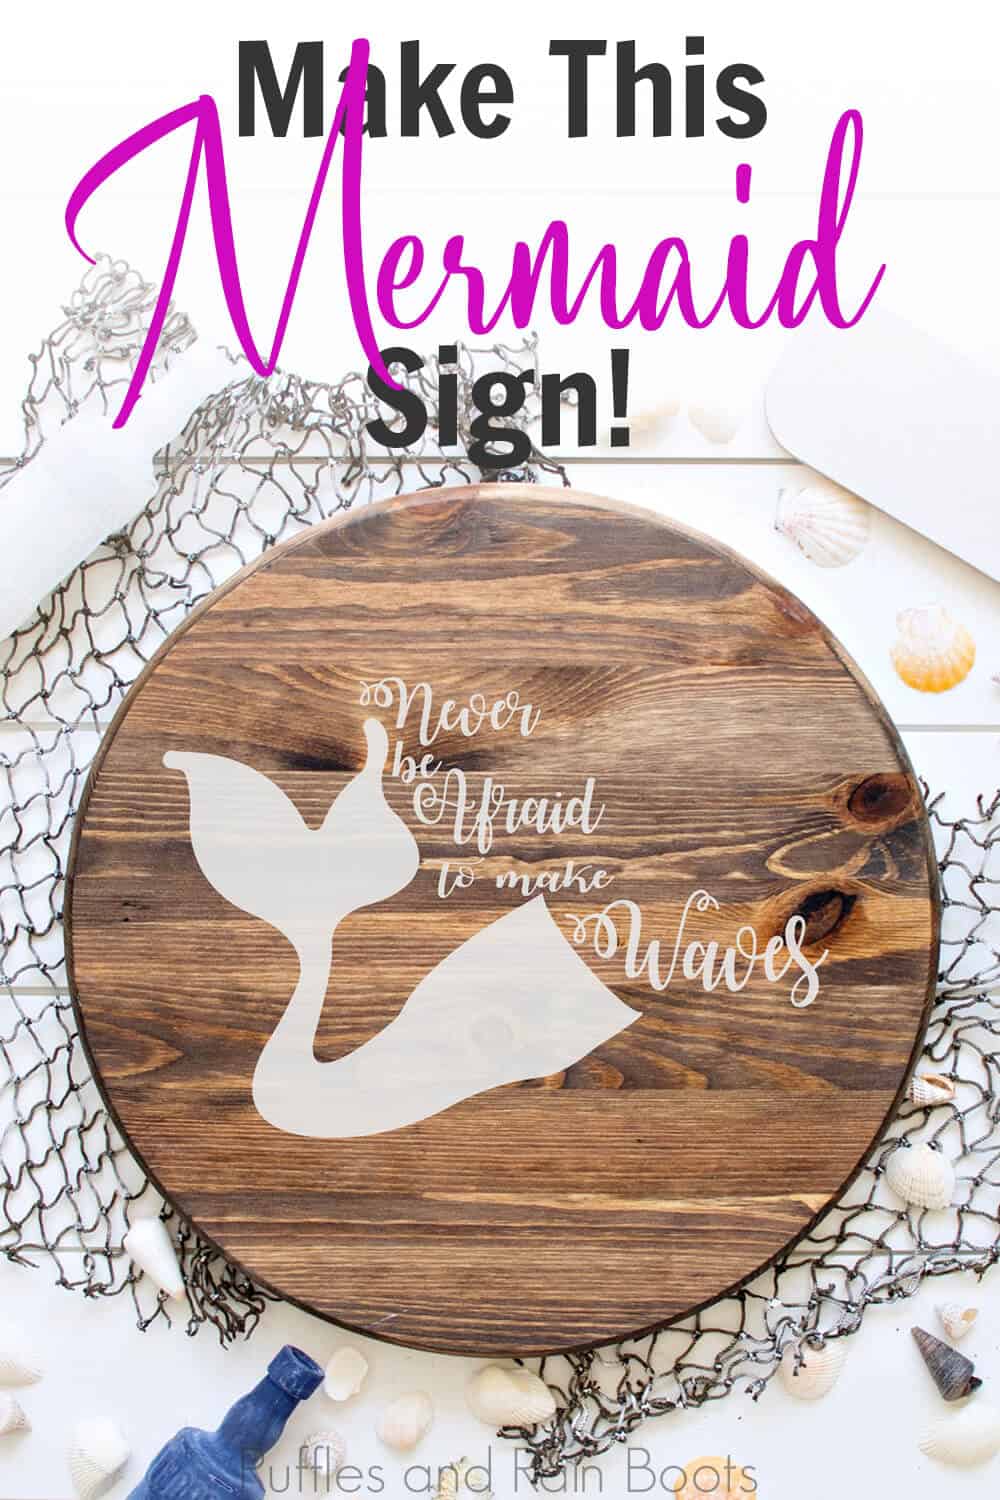 never be afraid to make waves free mermaid cut file on a round wood sign on a fishing net on a white wood background with sea shells, a blue bottle and oars scattered around with text which reads make this mermaid sign